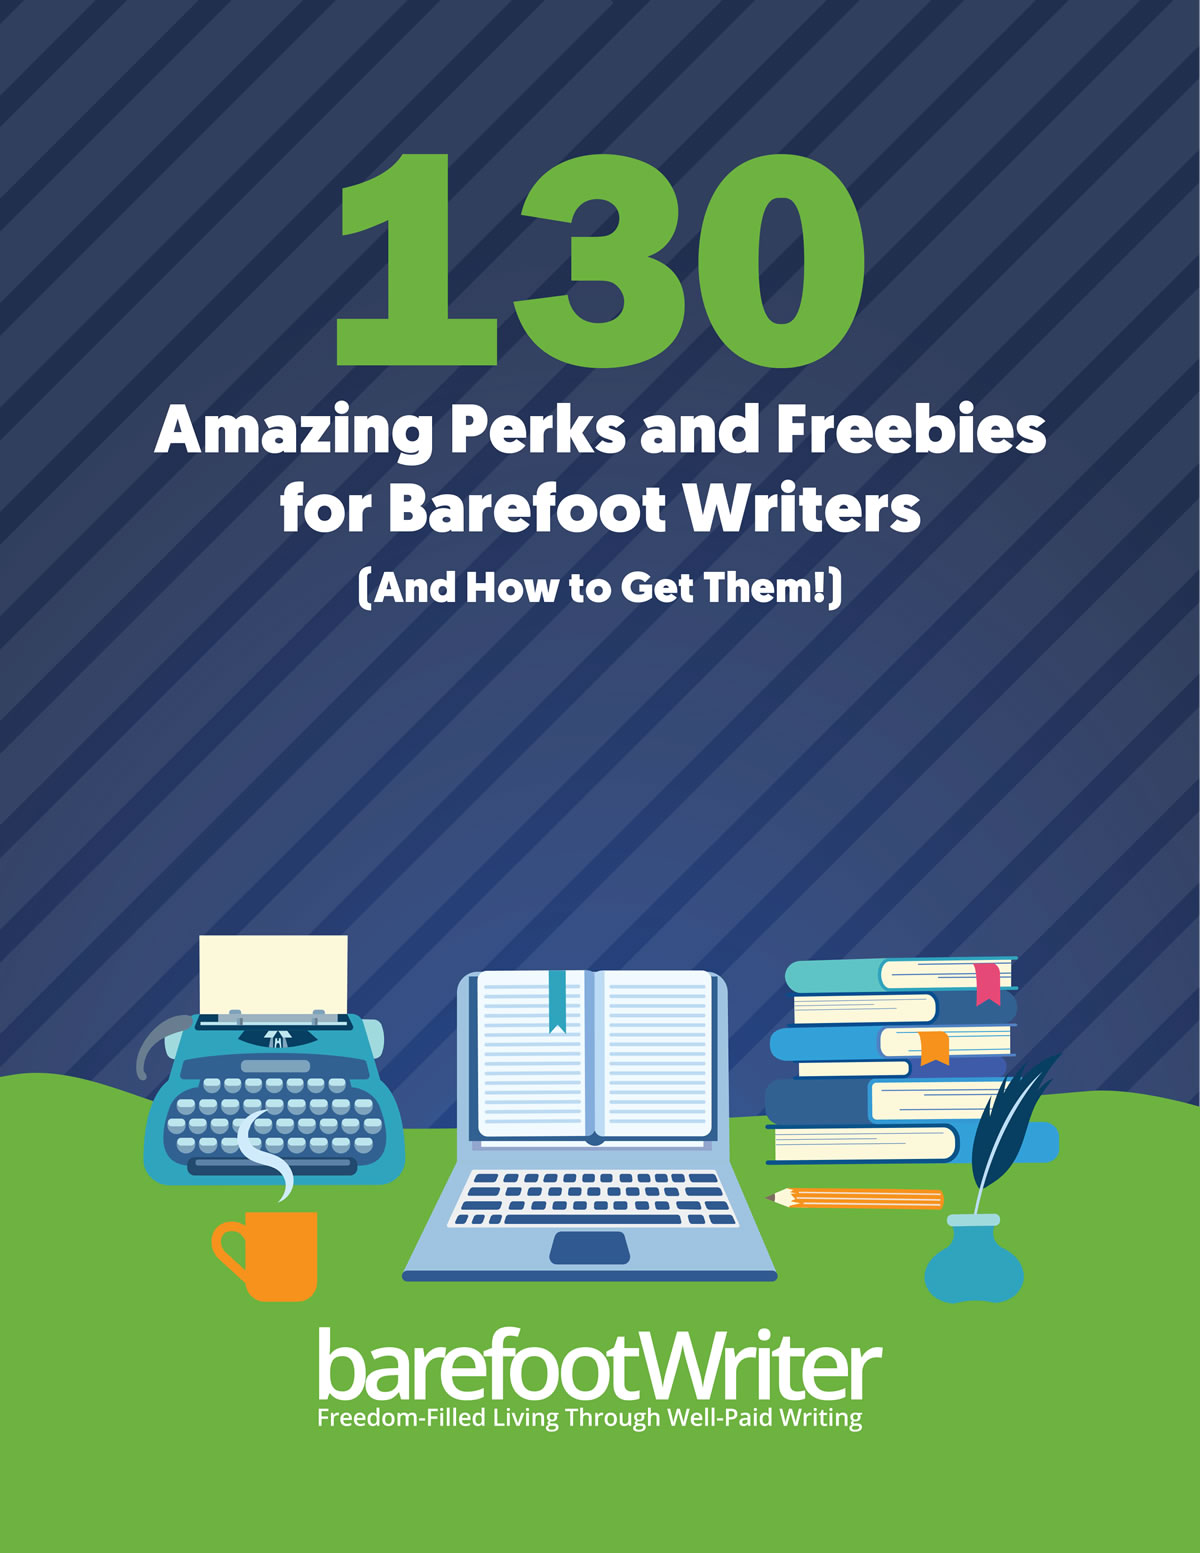 130 Amazing Perks And Freebies Report Cover